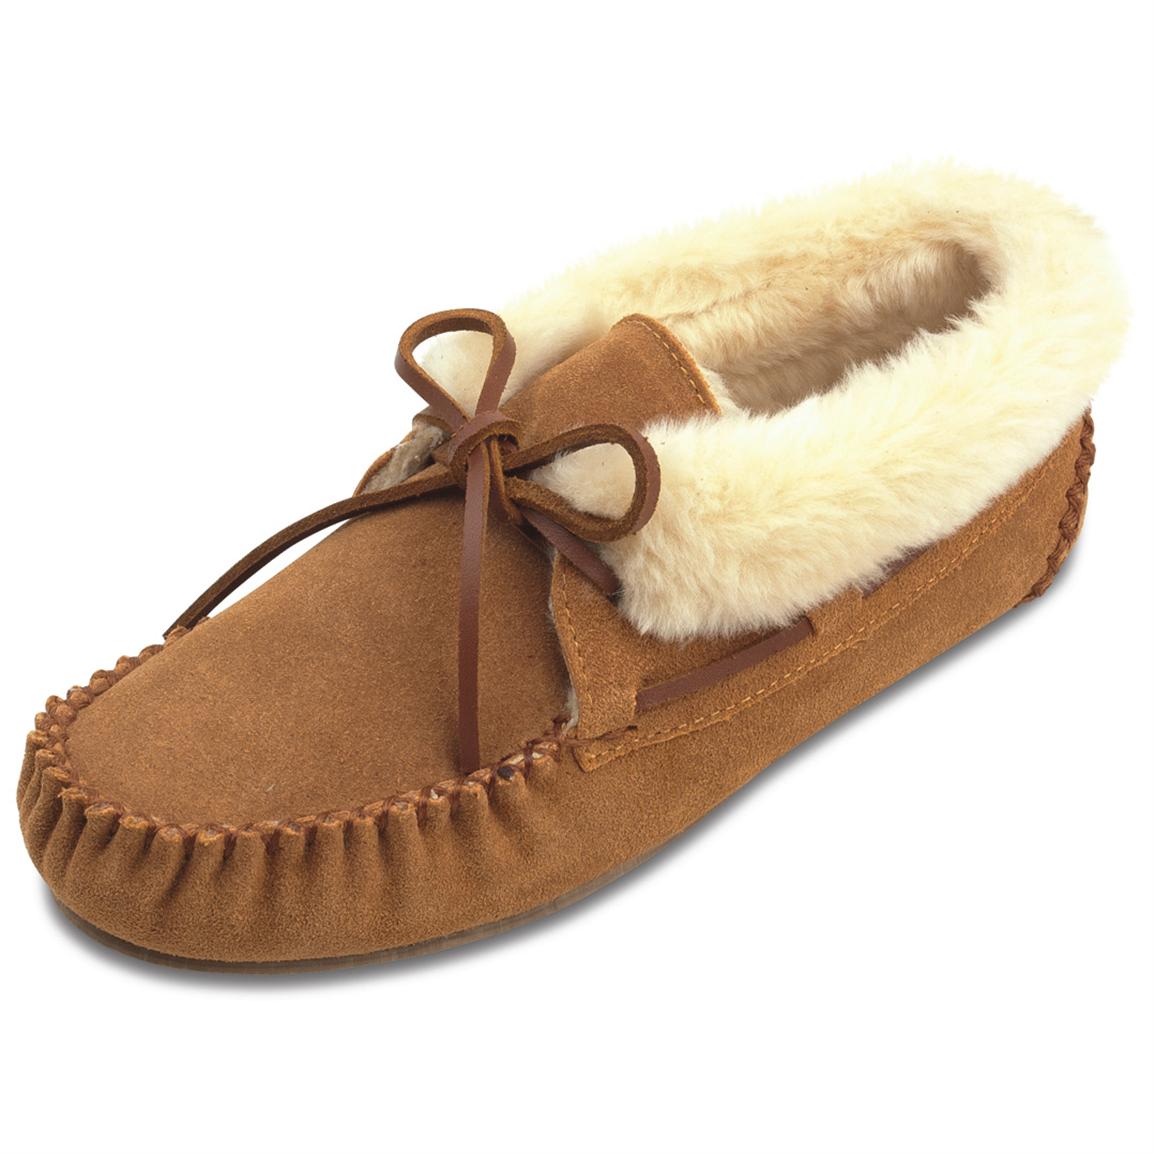 Moccasin Chrissy Bootie Moccasins 